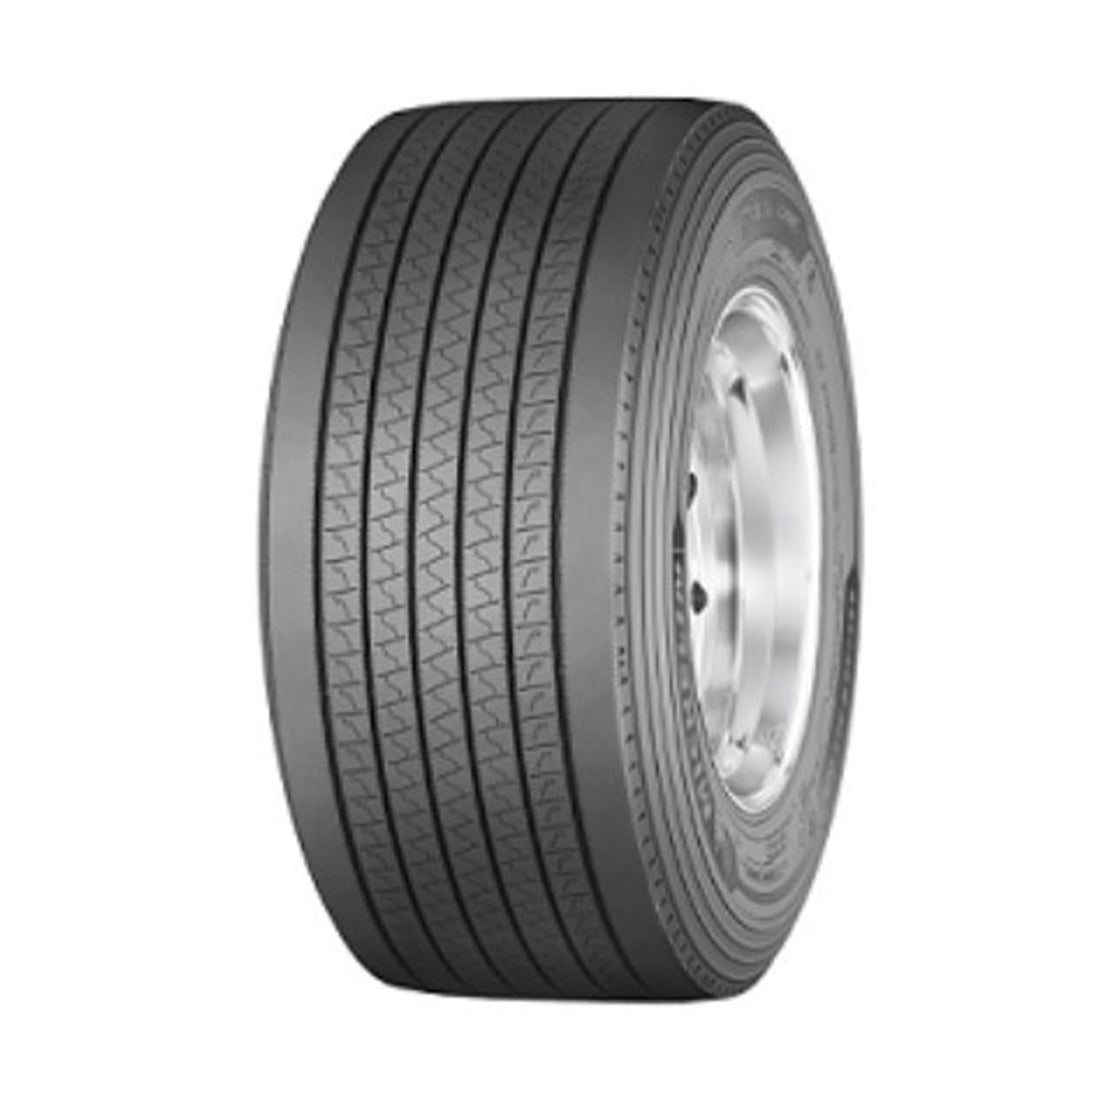 445/50R22.5 20PR 161L Michelin X ONE LINE ENERGY T2 From OTRUSA.COM